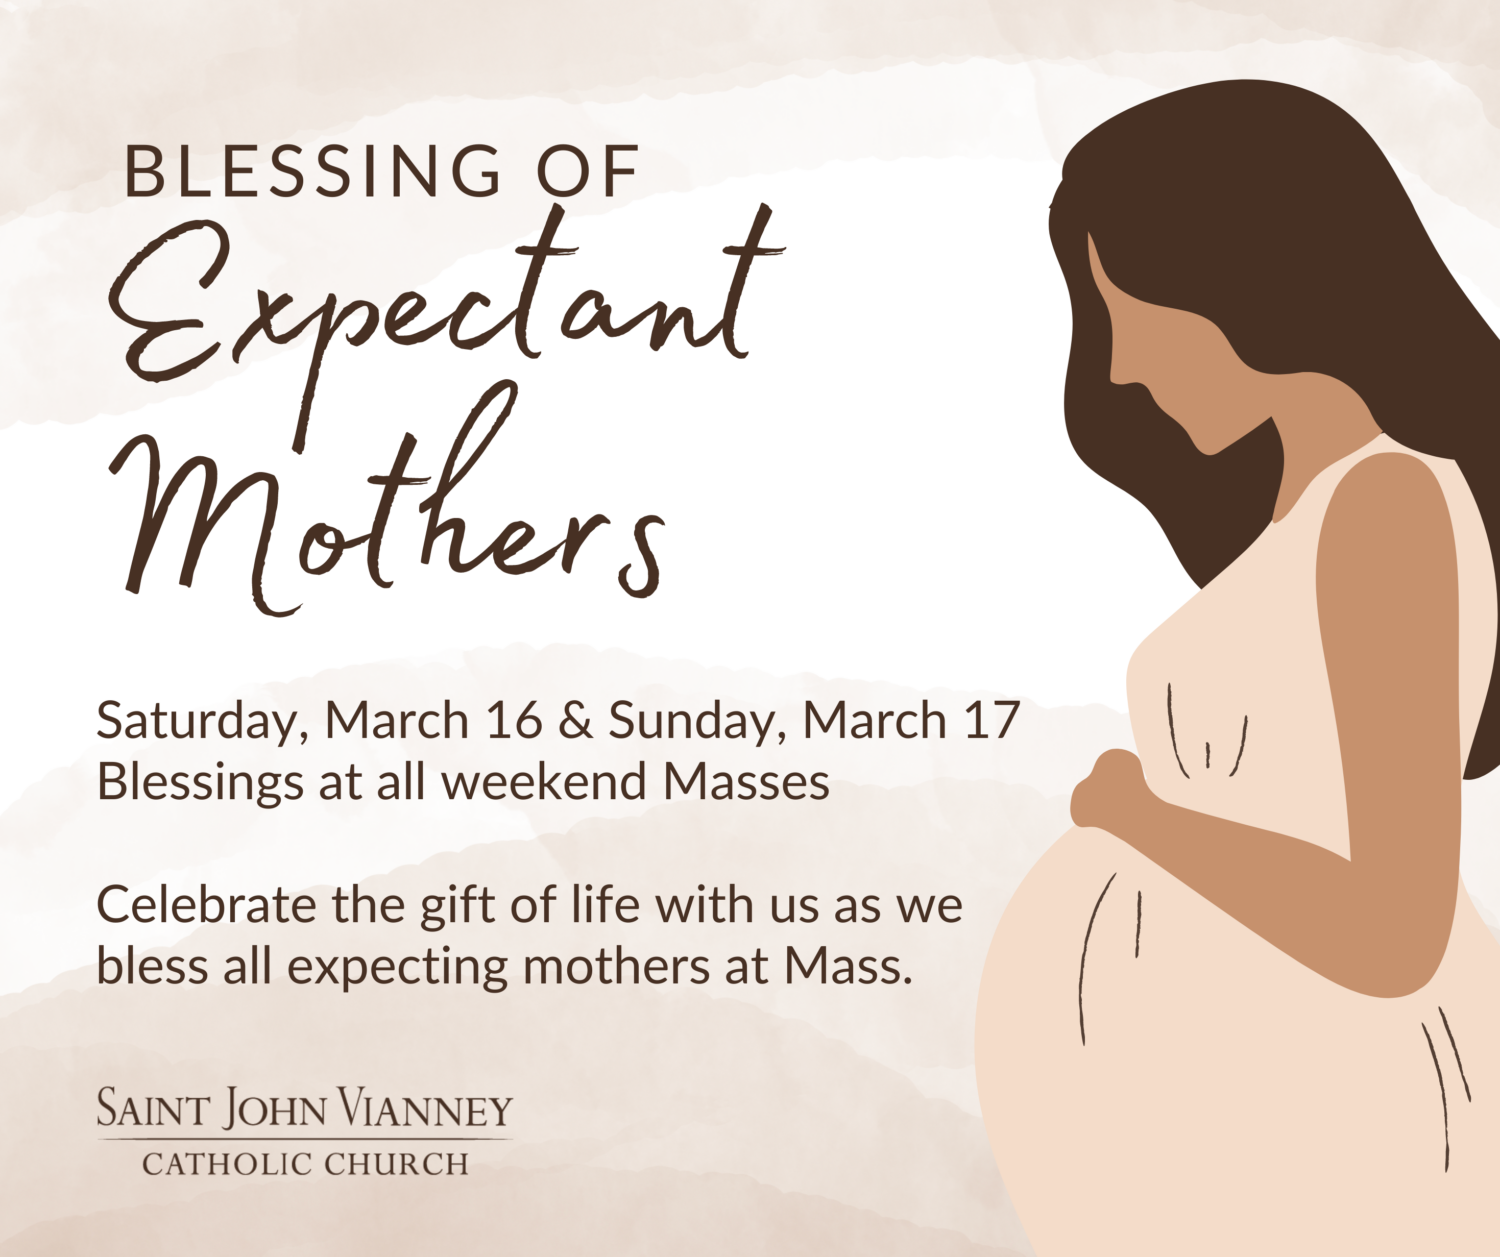 https://www.stjohnvianney.org/wp-content/uploads/2024/03/Blessing-of-Expectant-Mothers-Social-Medai.png